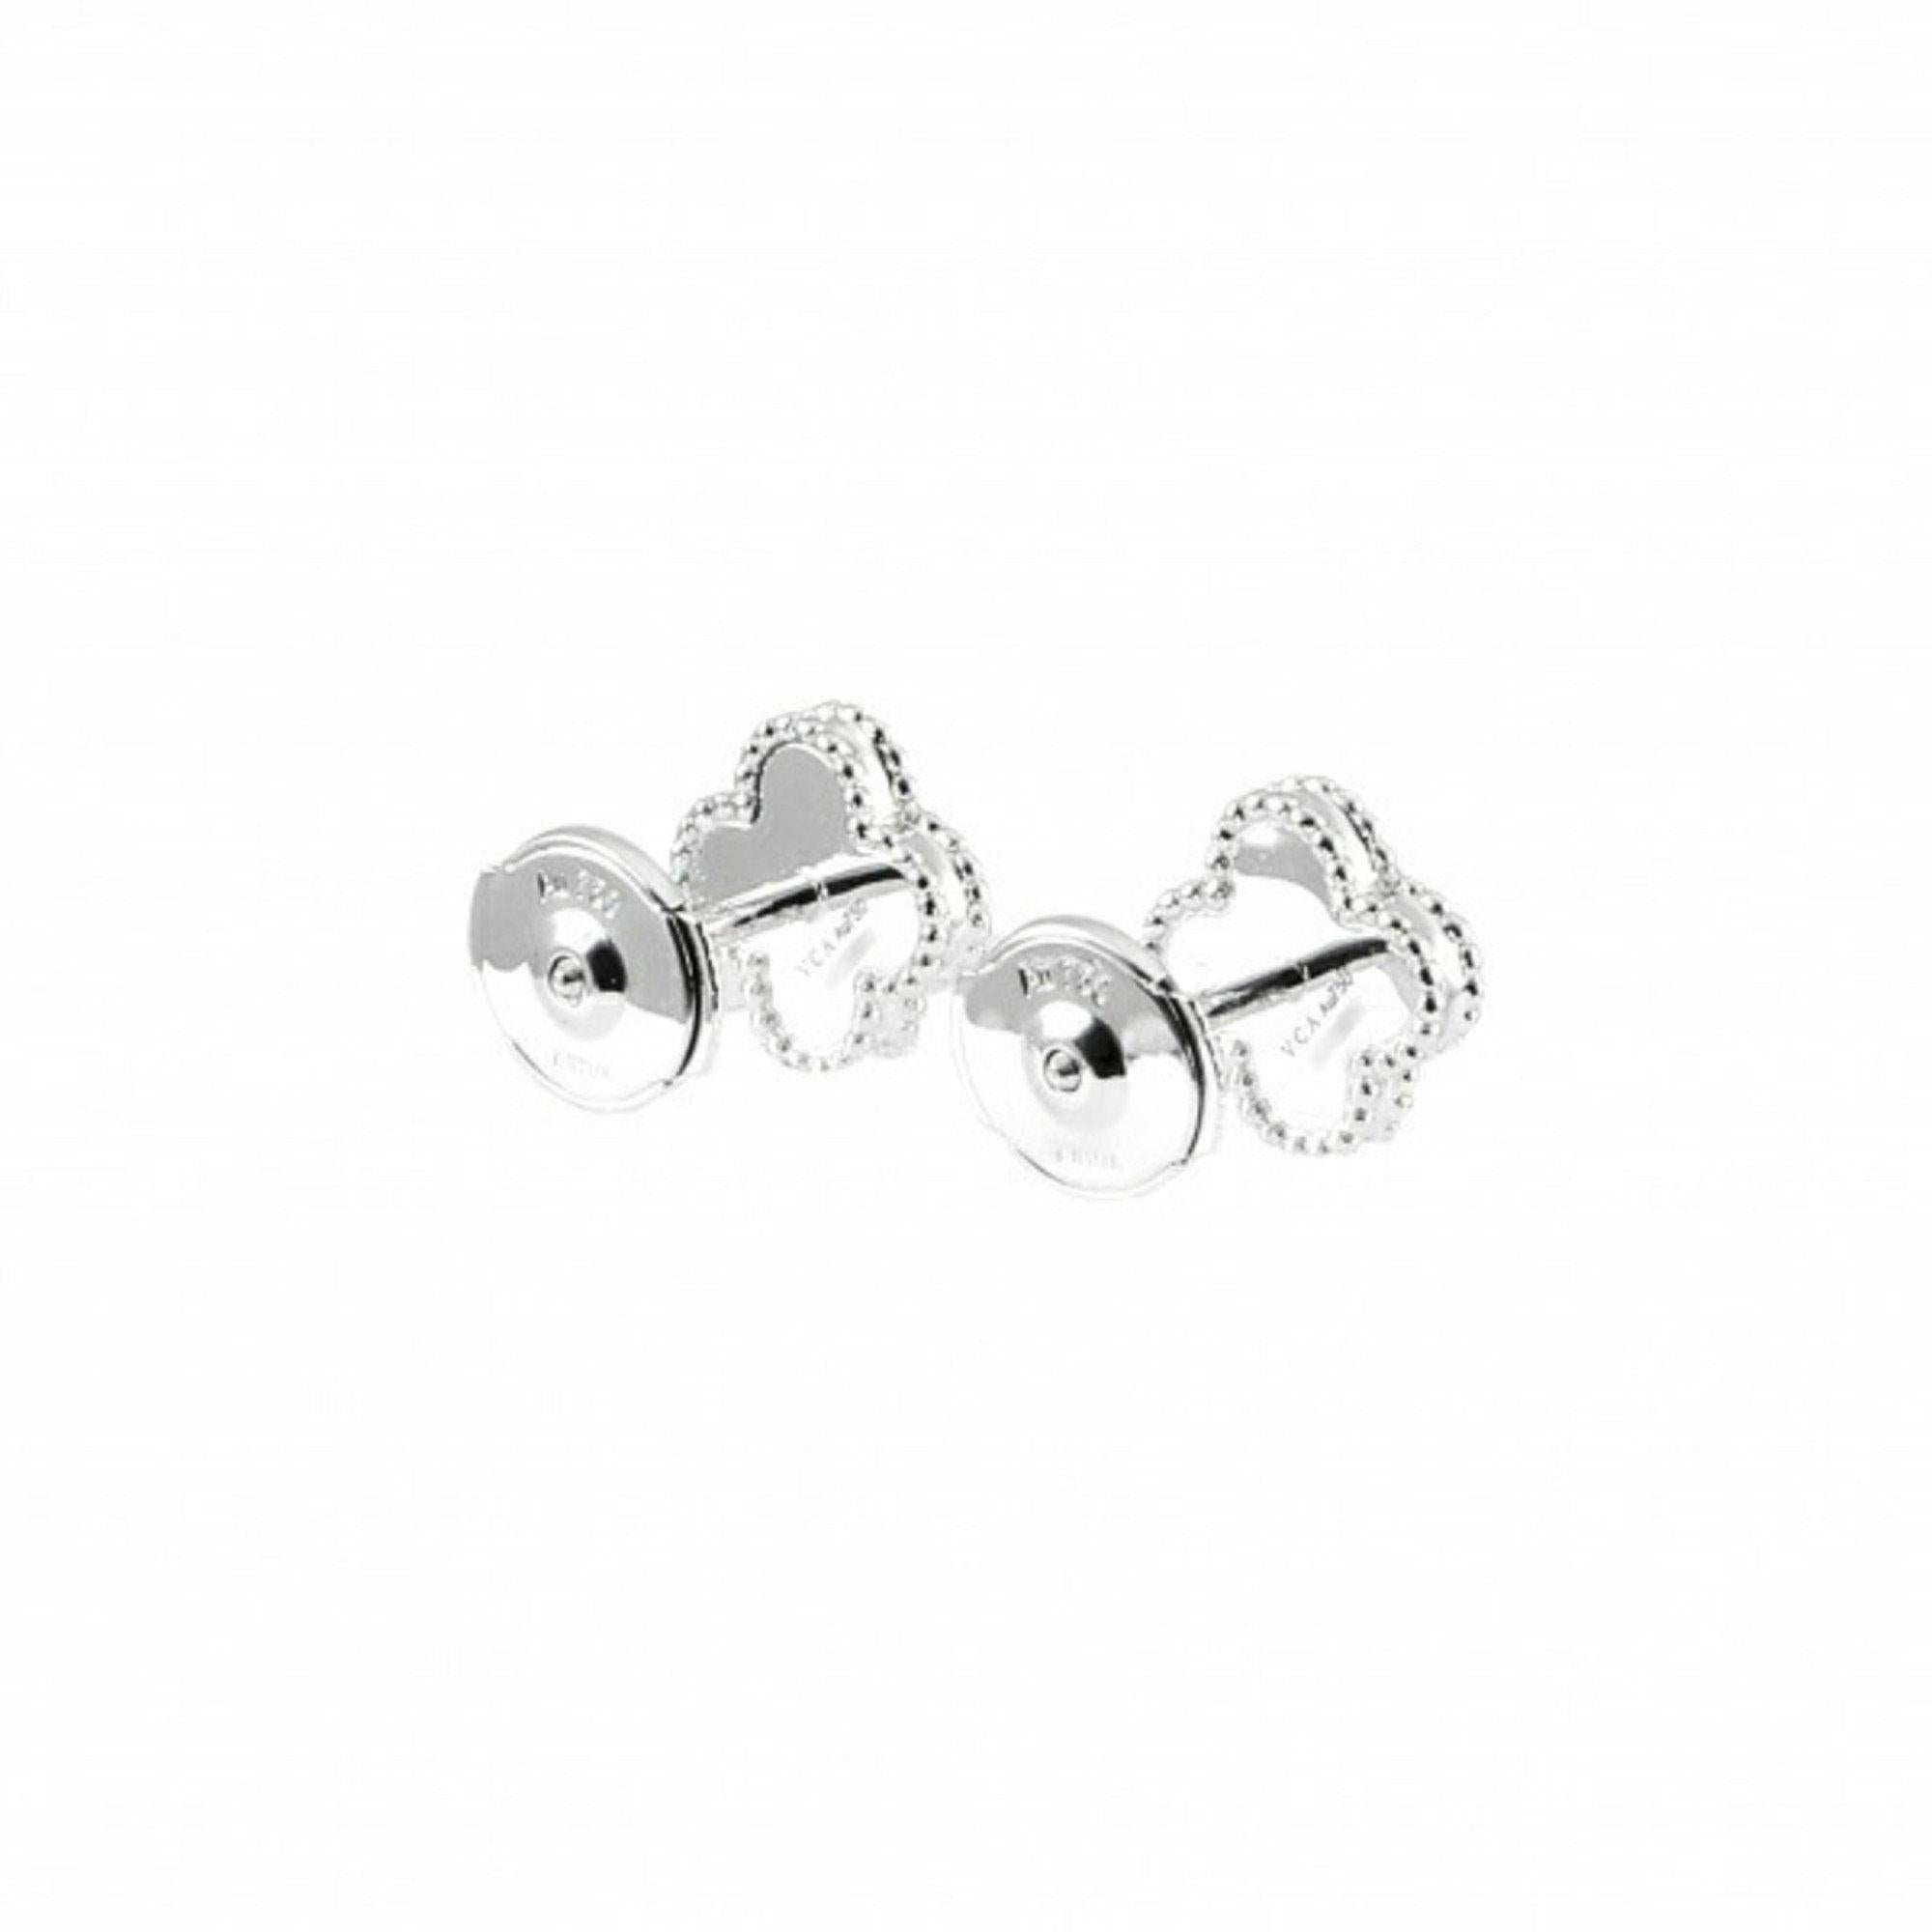 Van Cleef & Arpels Sweet Alhambra Earrings in 18K White Gold

Additional information:
Brand: Van Cleef & Arpels
Line: Sweet Alhambra
Material: White gold (18K)
Condition: Good
Condition details: The item has been used and has some minor